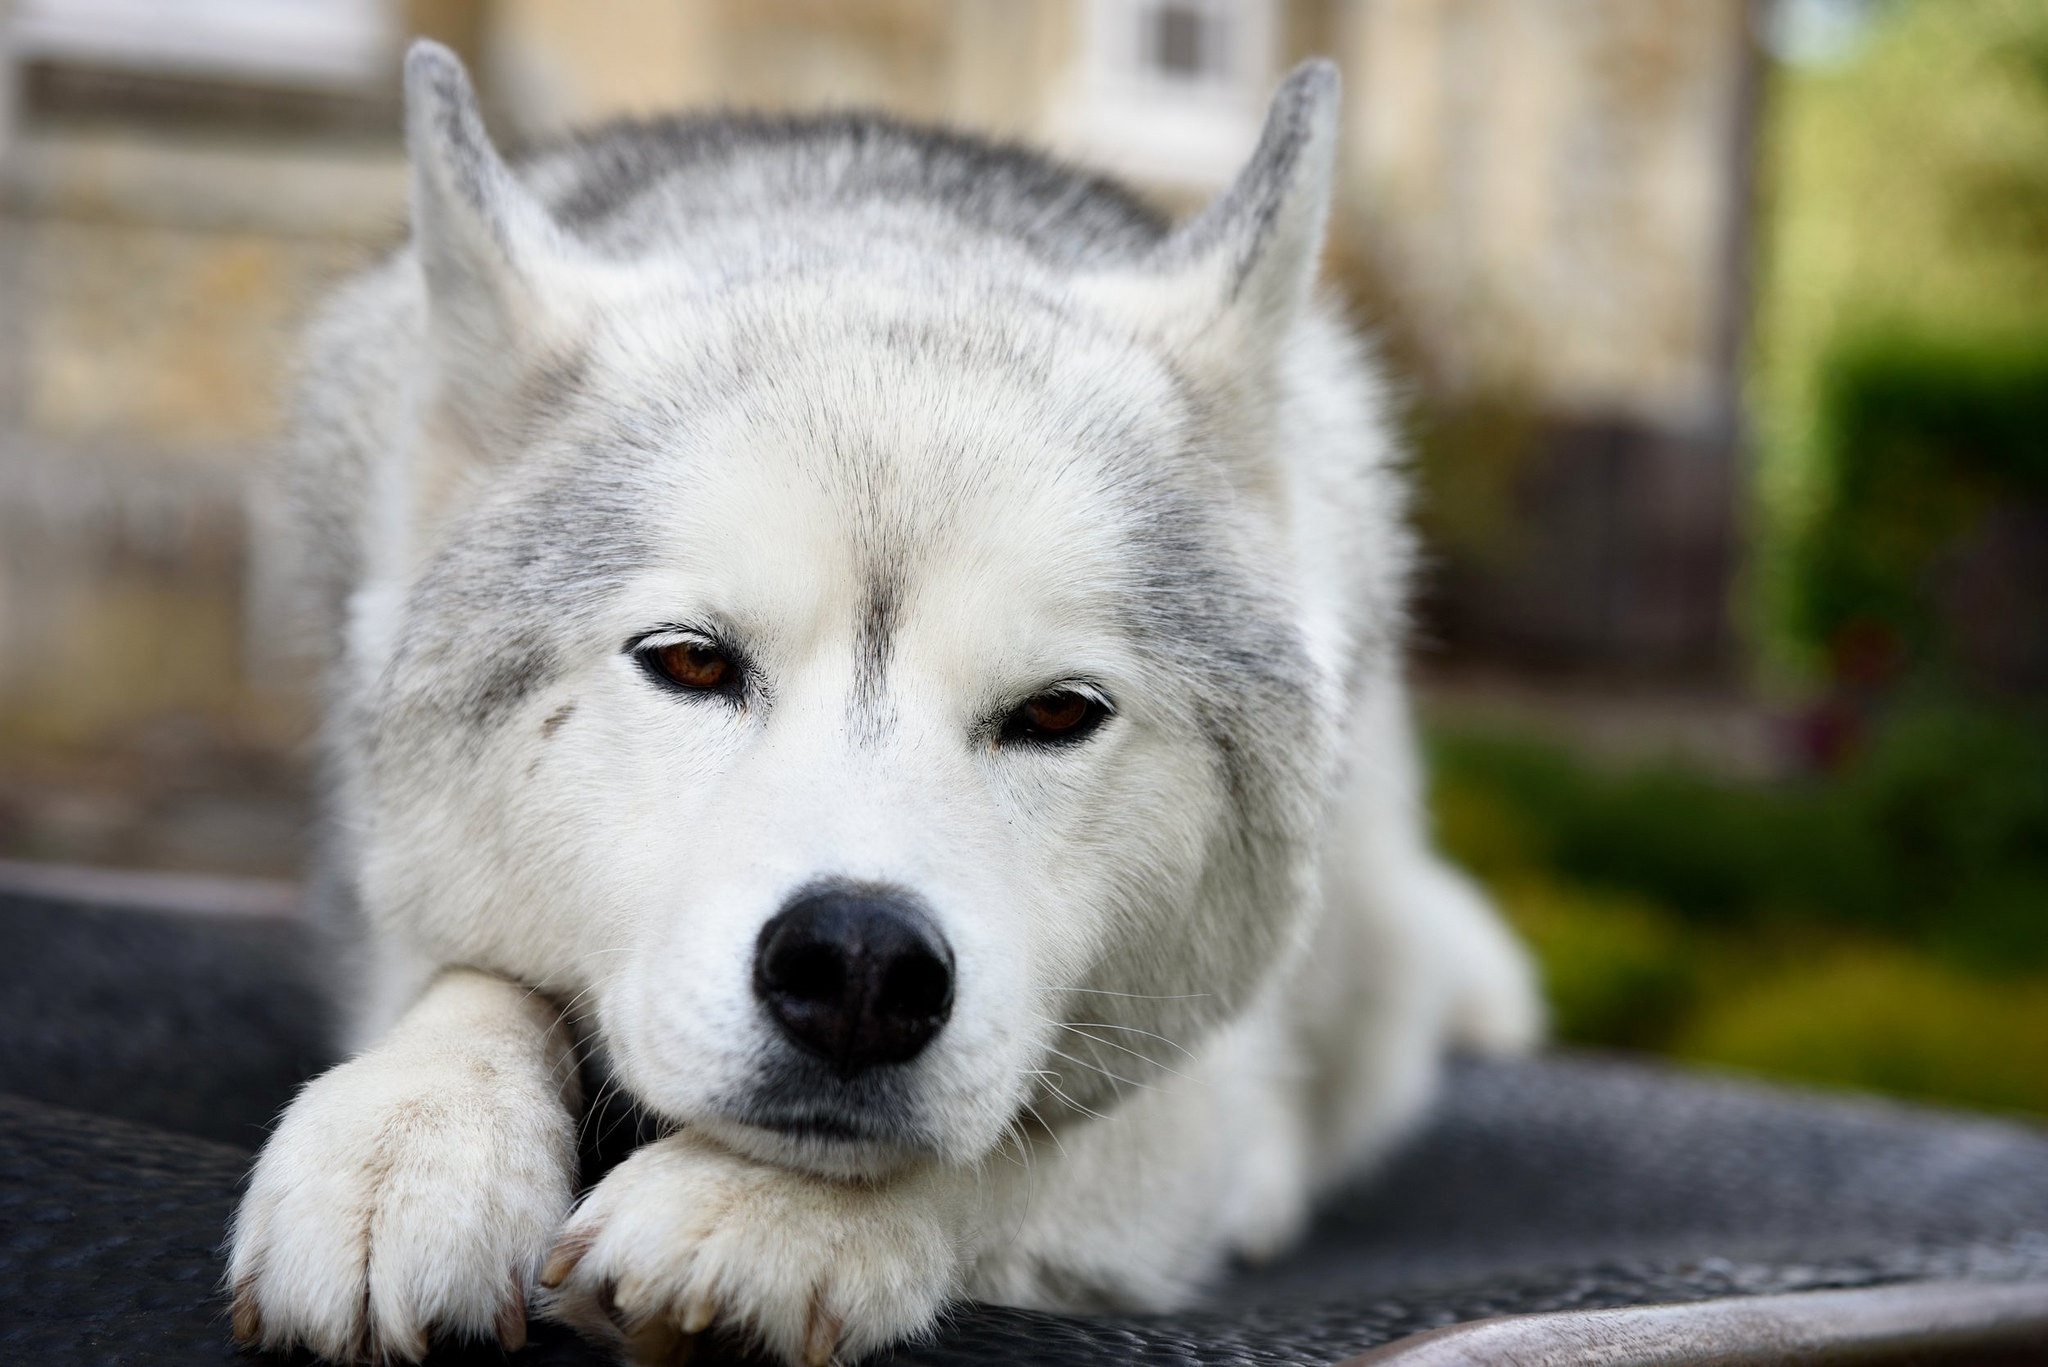 Free download wallpaper Dogs, Dog, Muzzle, Animal, Husky, Resting on your PC desktop